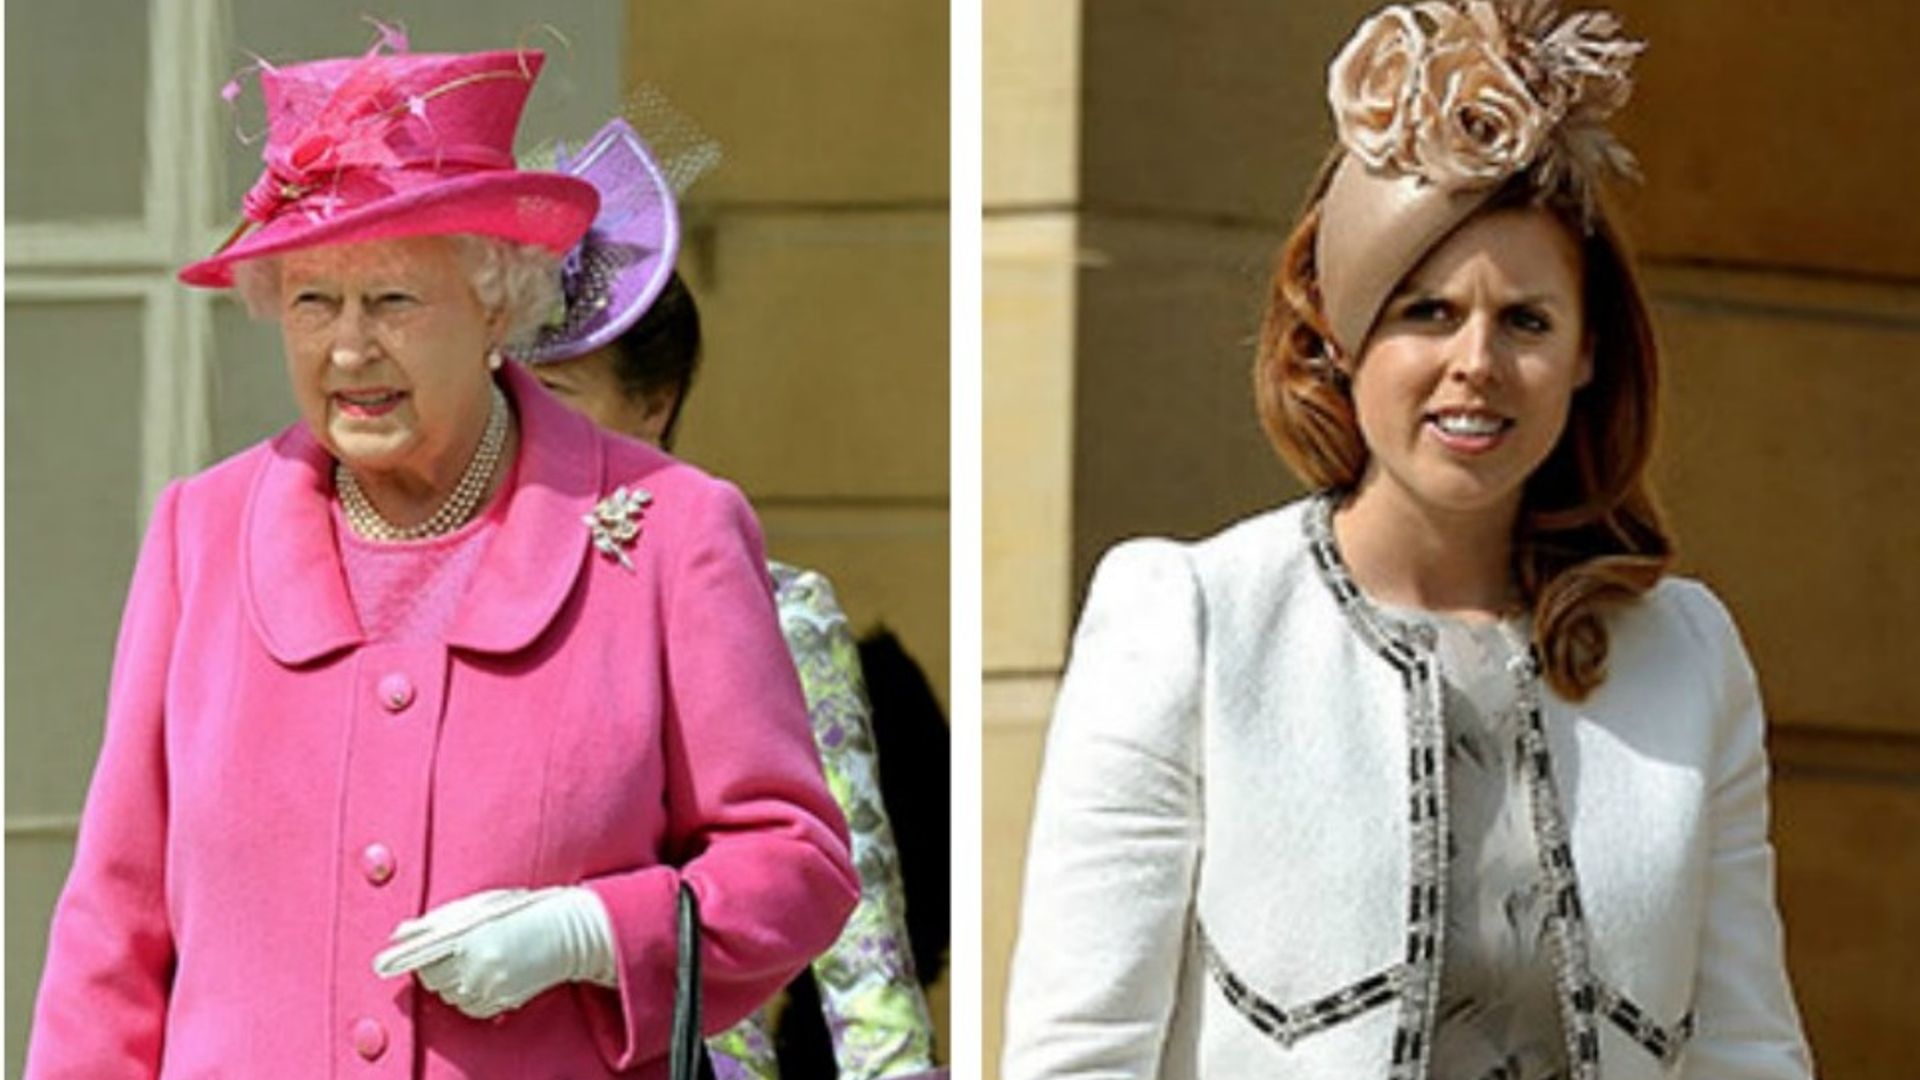 Queen Elizabeth, Princess Beatrice wear colorful hats to Palace garden party